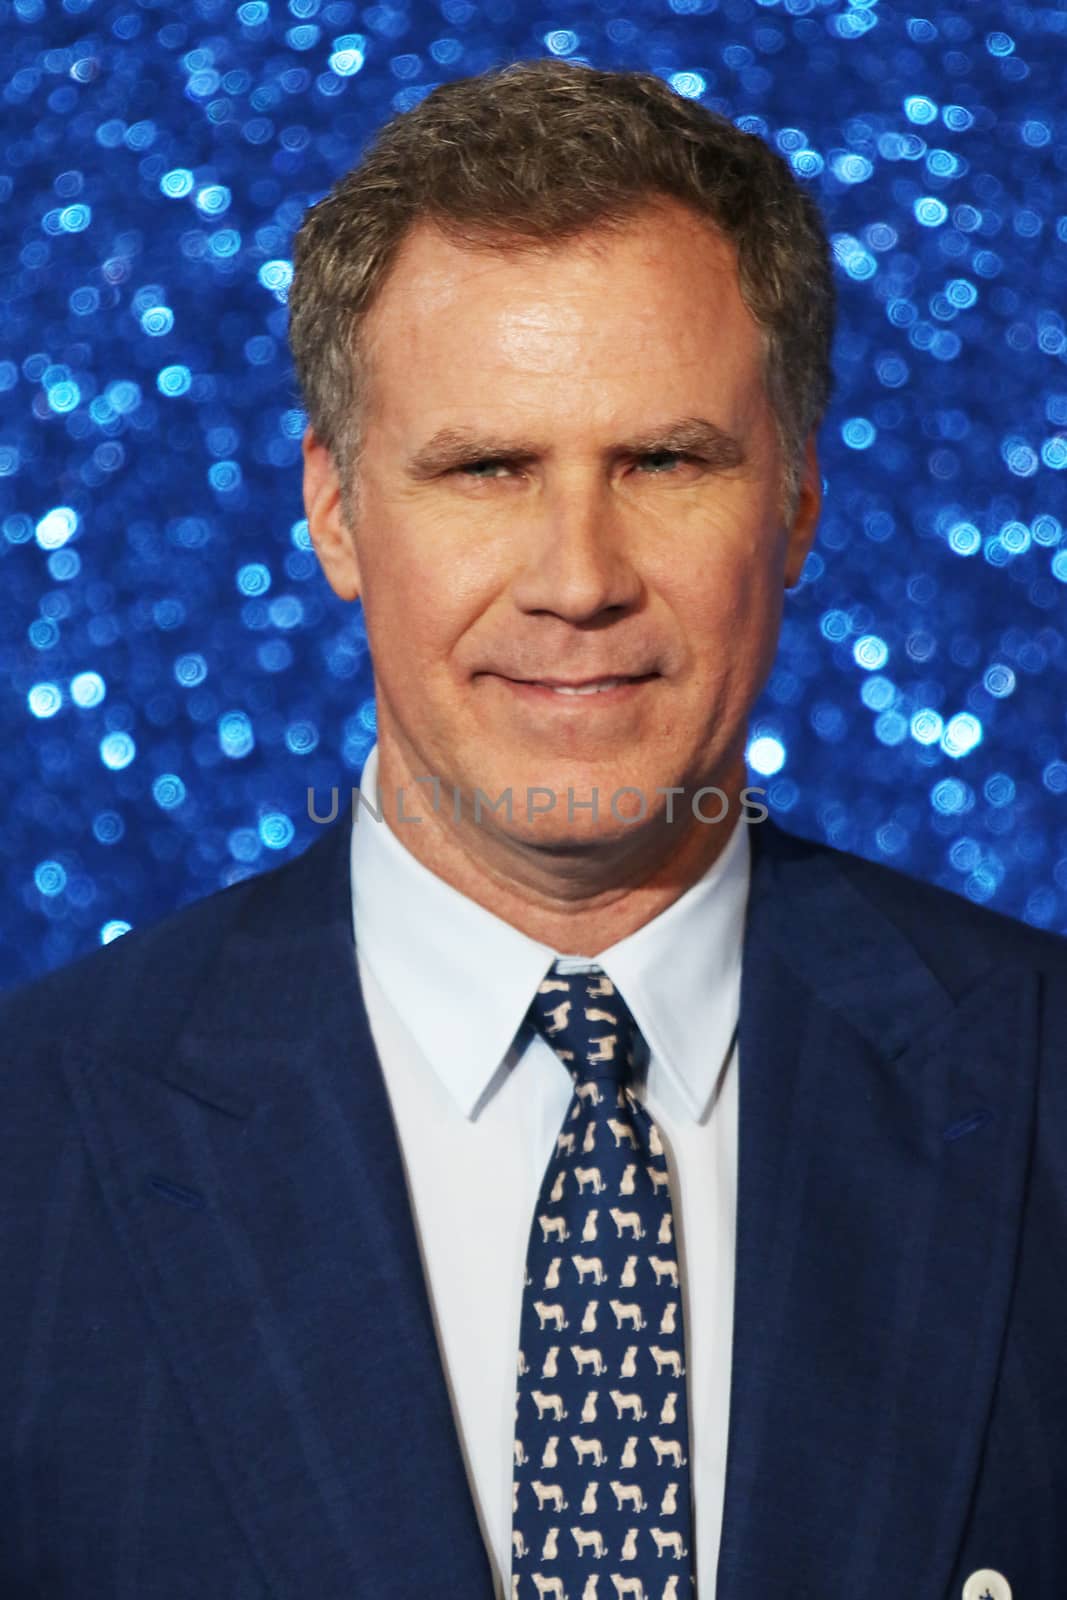 UK, London: Will Ferrell arrives on the blue carpet at Leicester Square in London on February 4, 2016 for a fashionable screening of Zoolander No. 2, the long-awaited sequel to Ben Stiller's trademark hit.